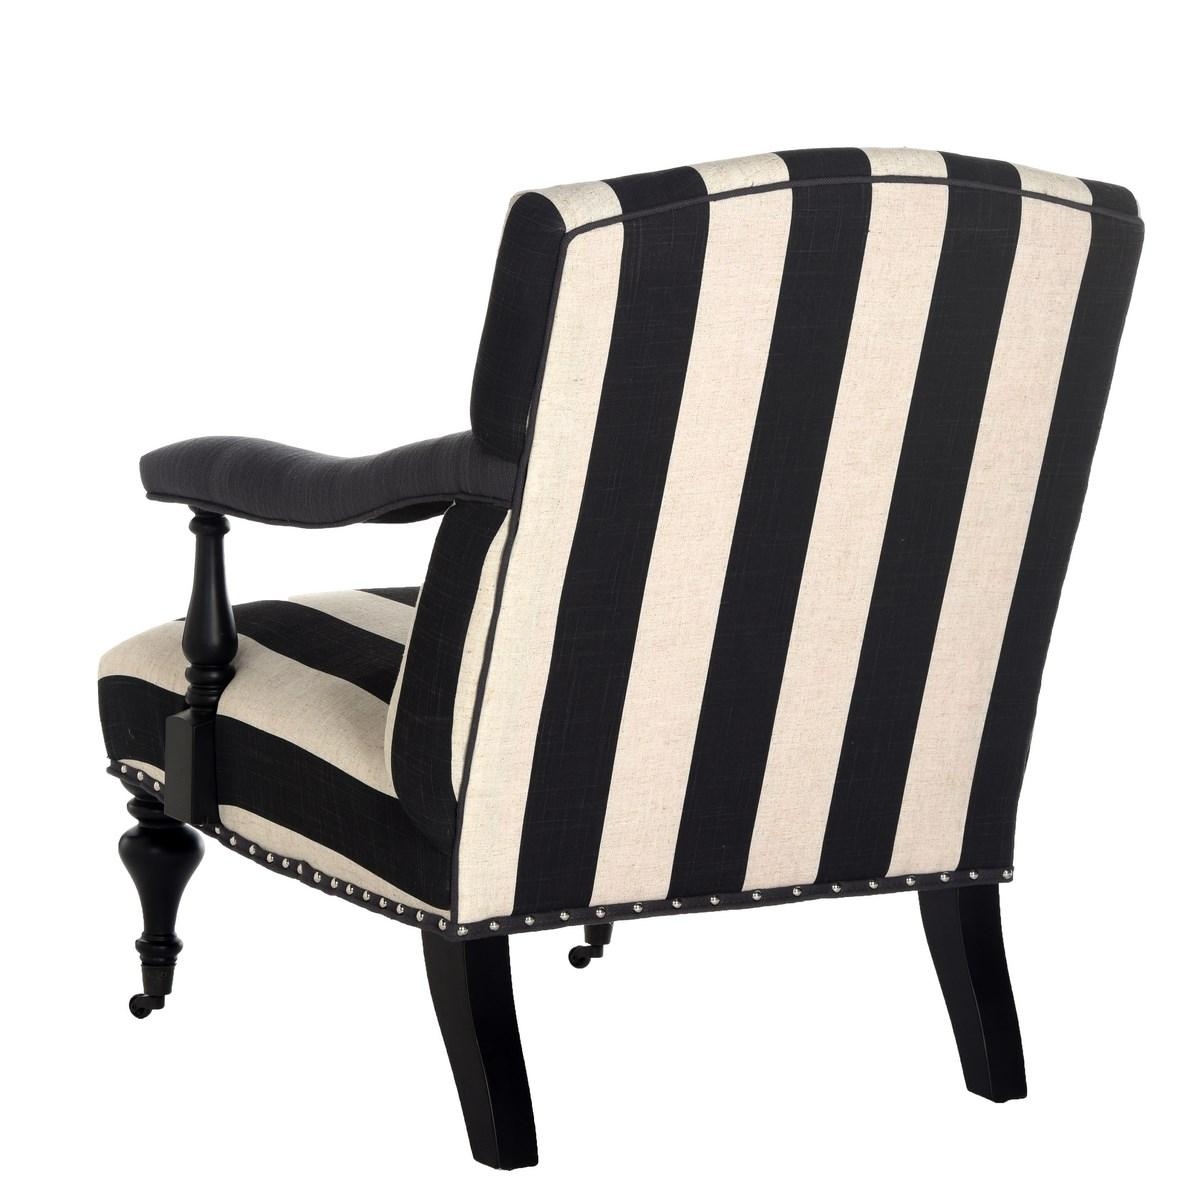 Devona Awning Stripe Arm Chair - Silver Nail Heads - Charcoal/White - Arlo Home - Image 2